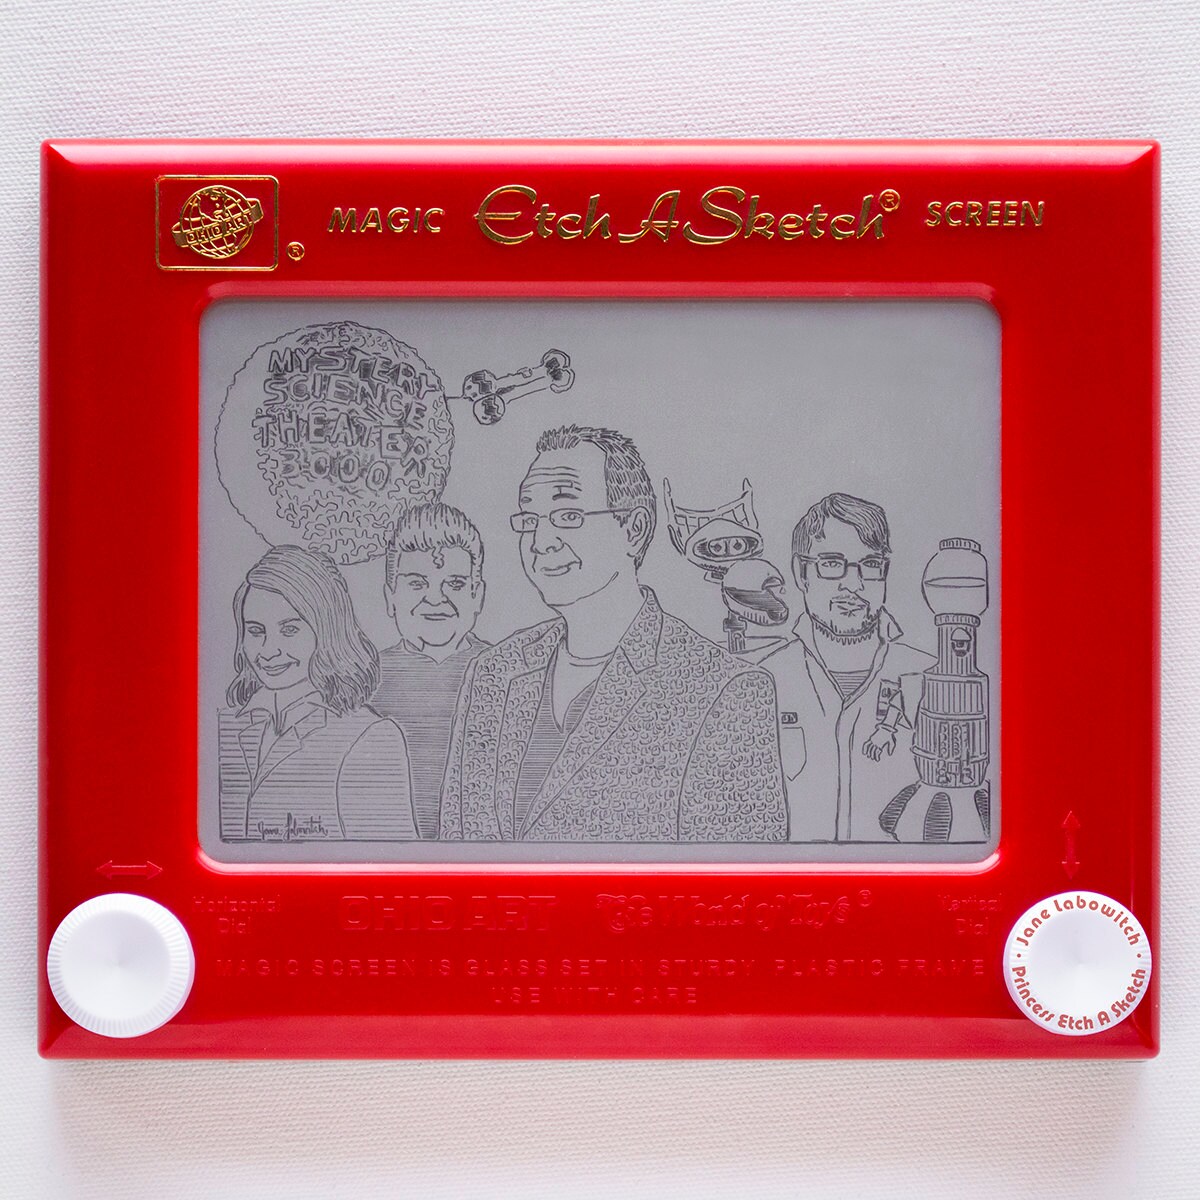 Van Gogh Starry Night Signed Etch A Sketch Art Print pick Your Size 